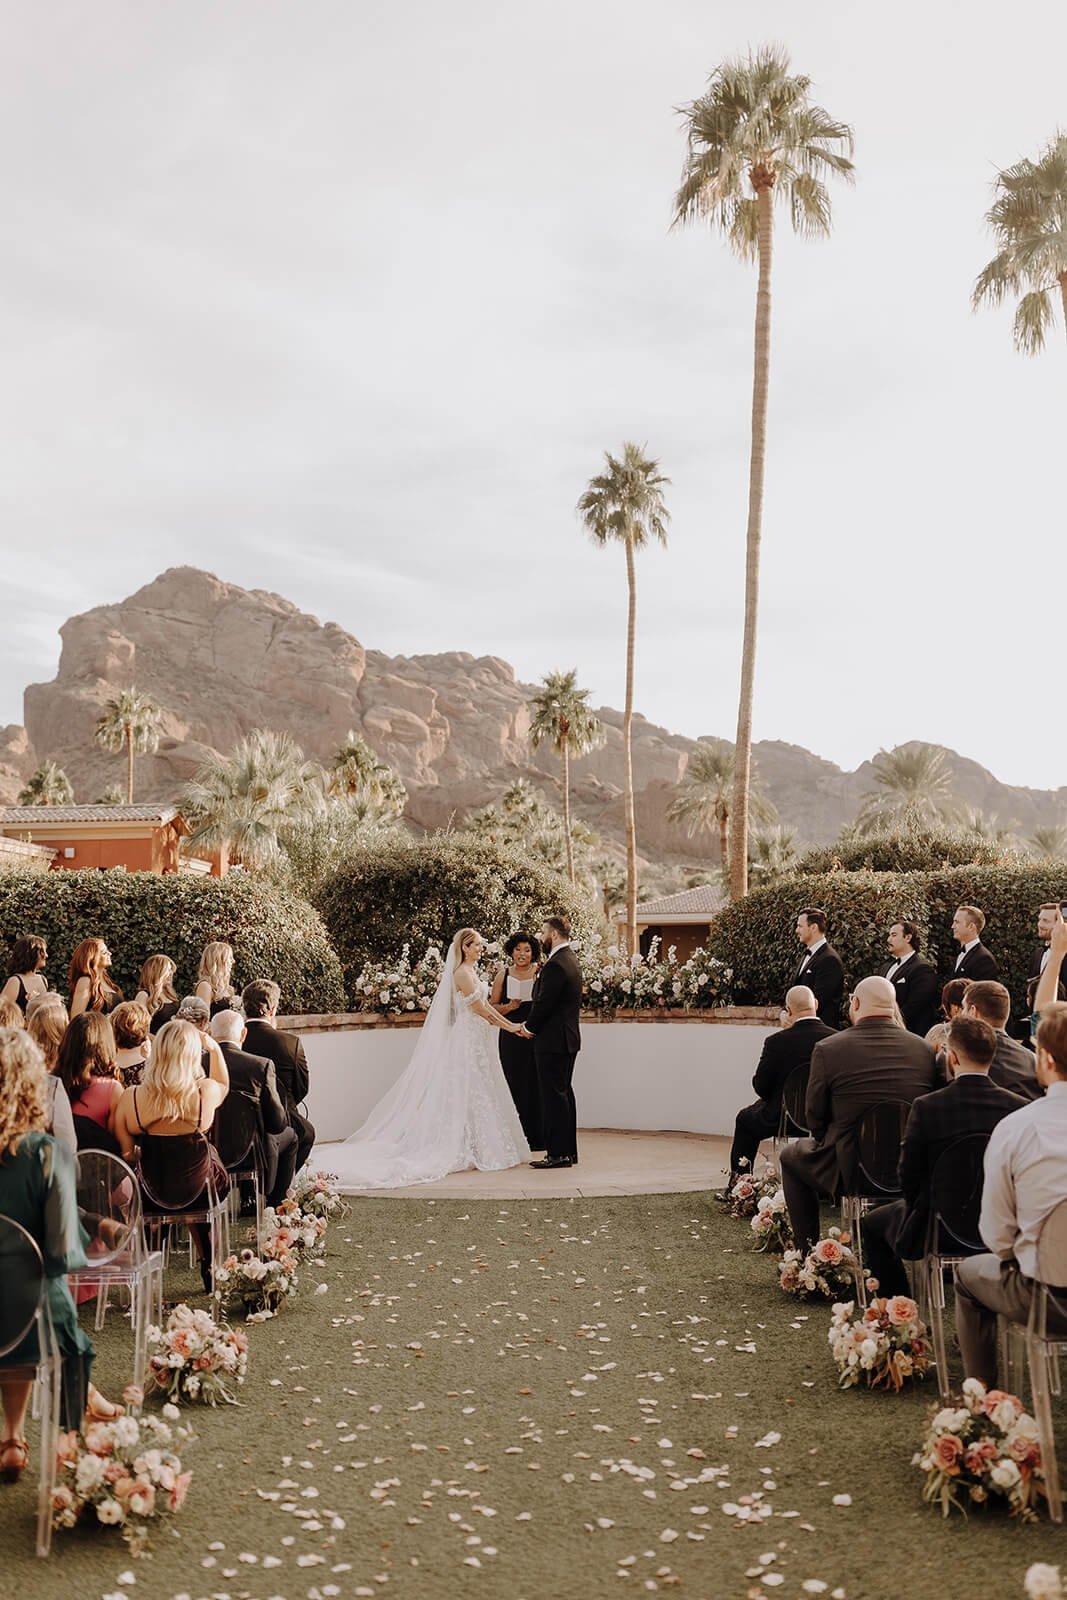 Bride and groom at outdoor ceremony with mountains in the background